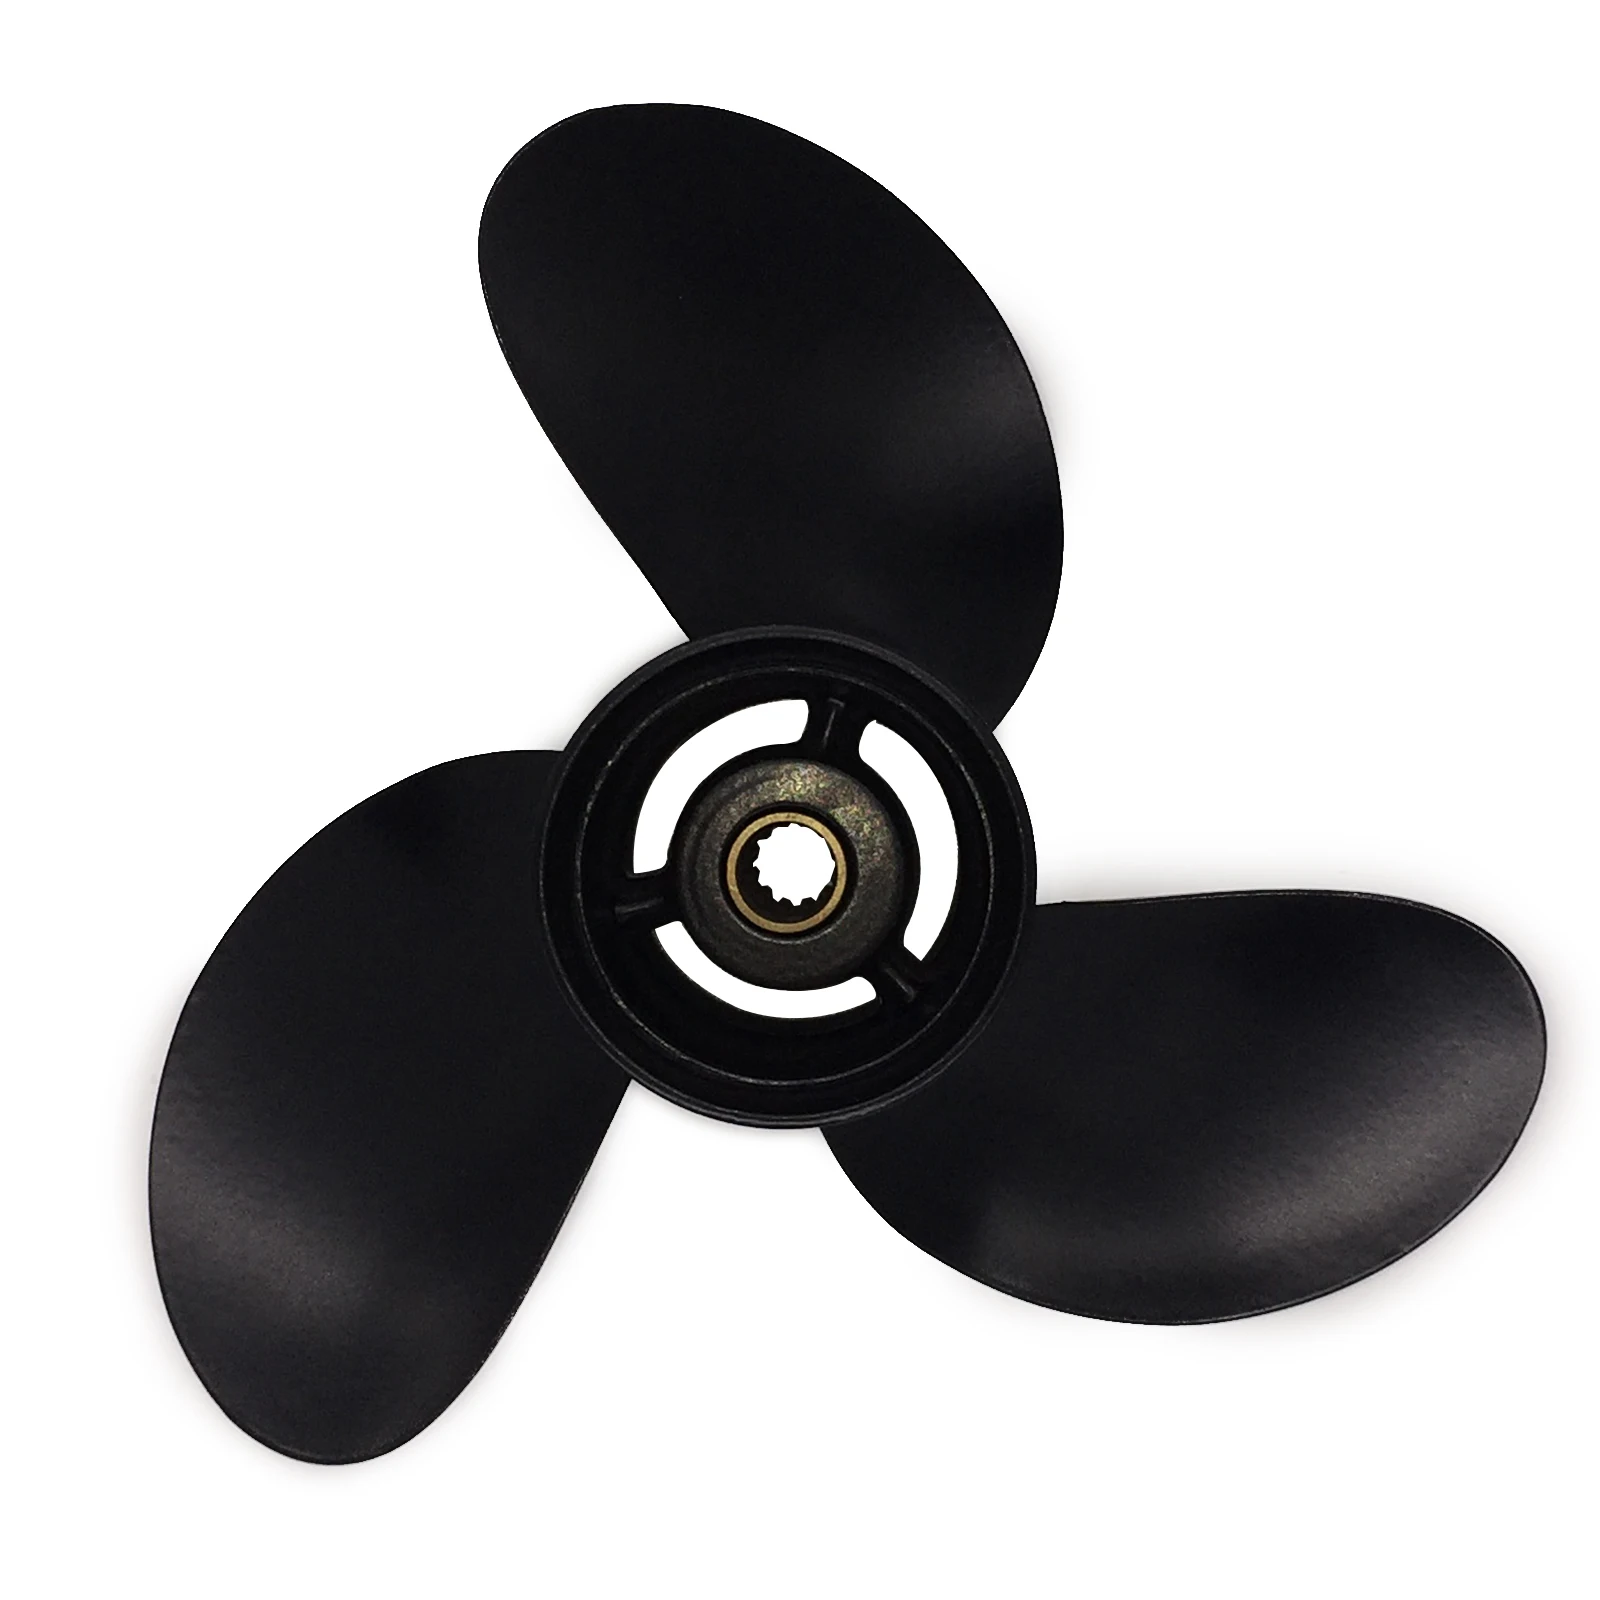 Boat Propeller 9.5x8 Fit for Tohatsu Outboard 9.8HP-18HP 3 Blades Aluminum Prop 14 Tooth Propel RH OEM NO: 3BAB64516-1 9.5x8 captain boat propeller 9 25x9 fit tohatsu outboard 9 9hp 15hp 18hp 20hp 14 tooth spline marine engine part stainless 3 blades